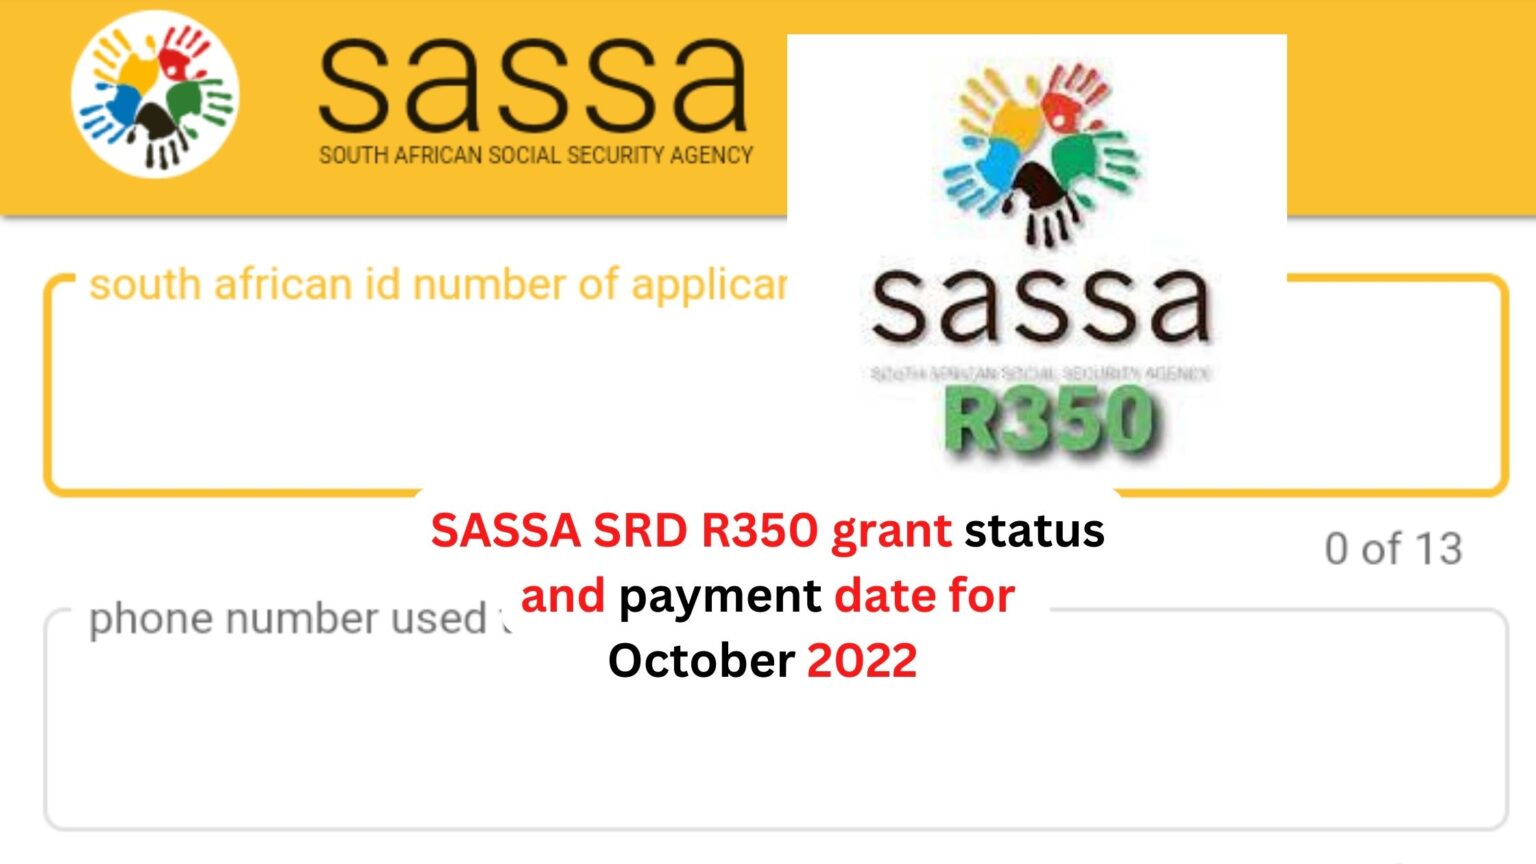 SASSA SRD R350 grant status and payment date for October 2022 SASSA NEWS